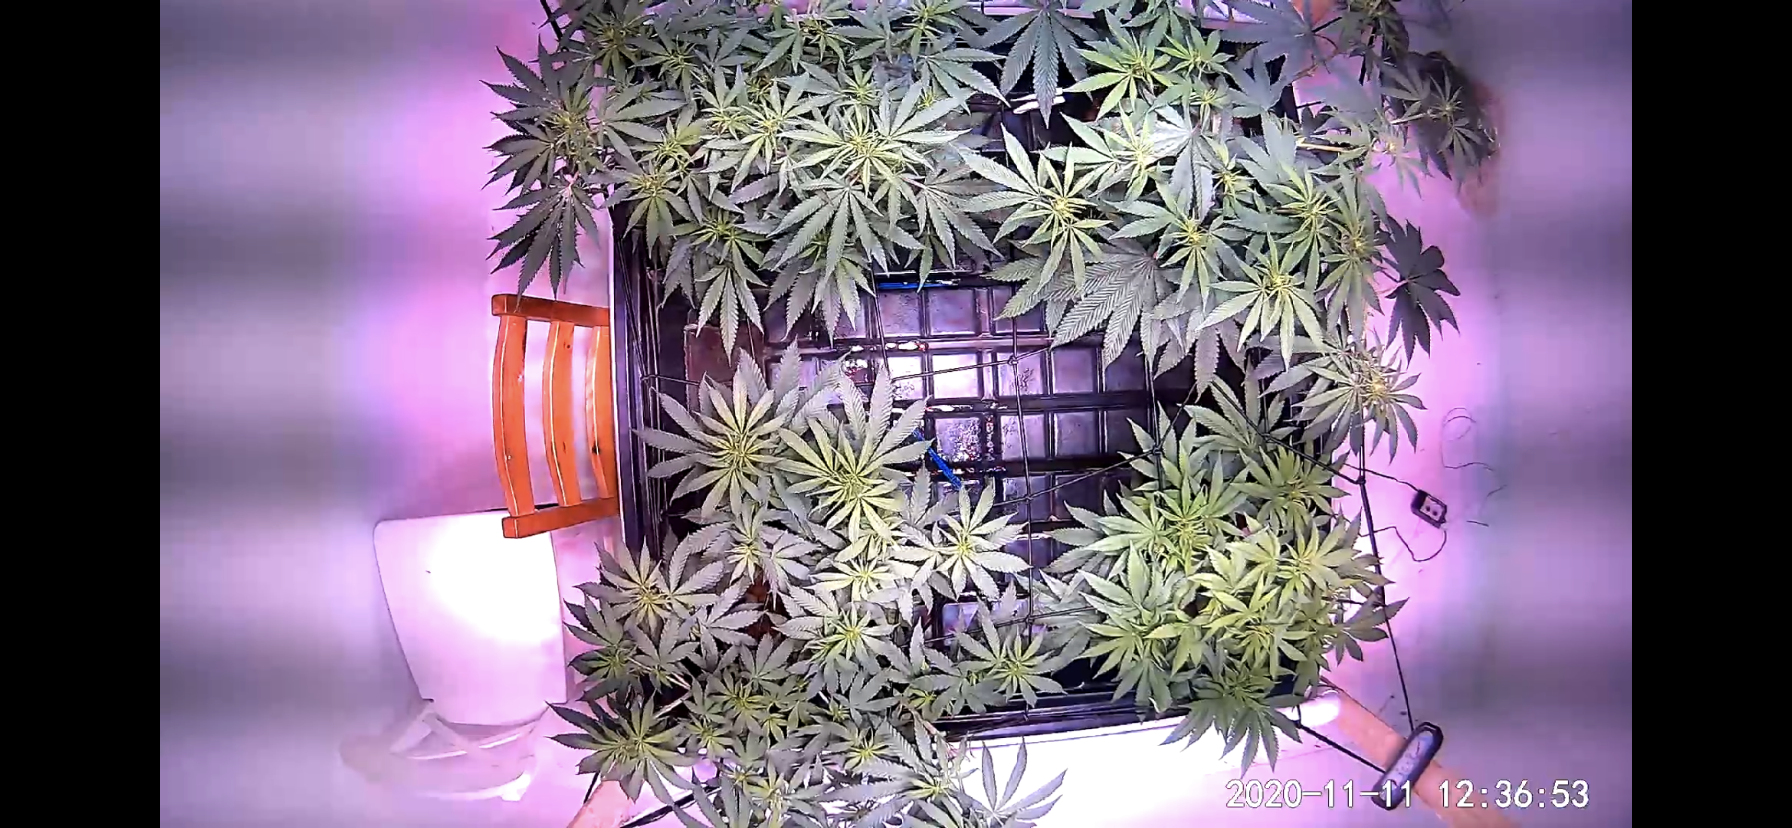 Posting up my current grow 12